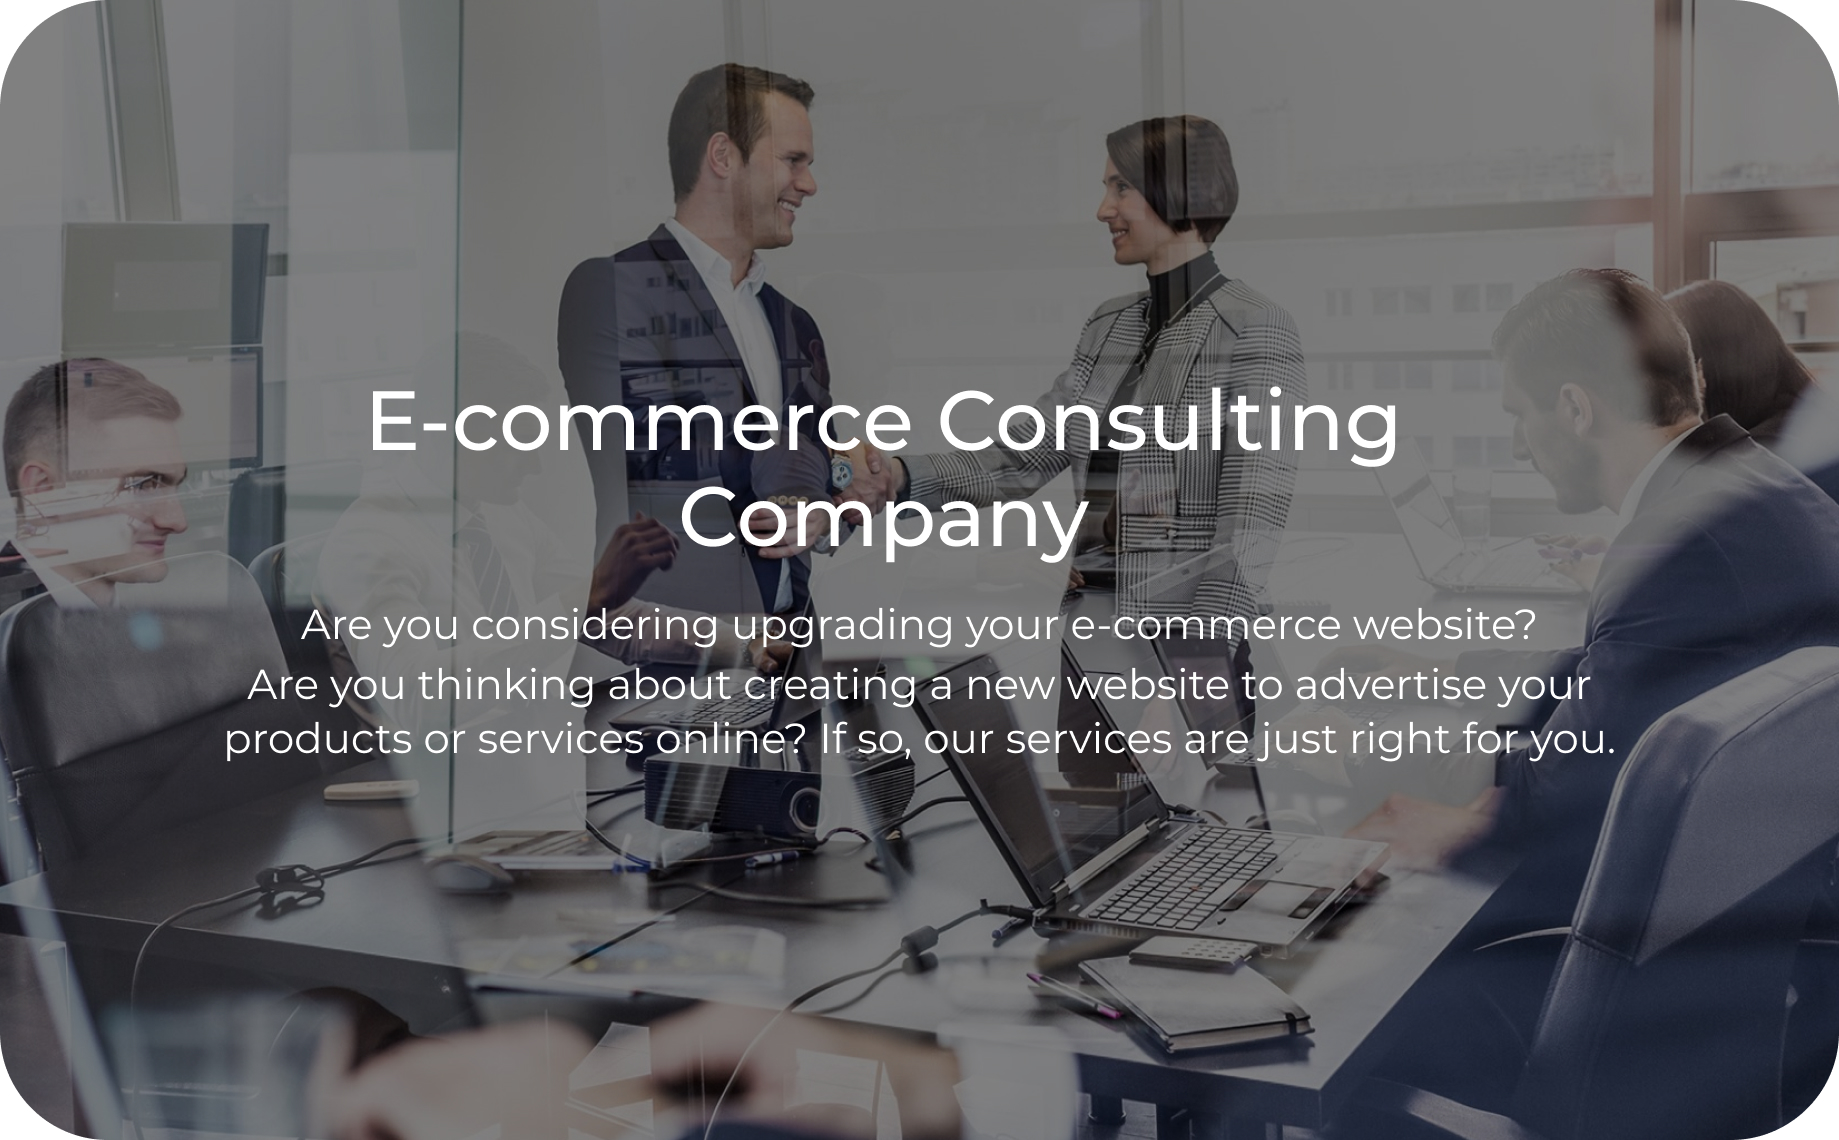 E-commerce Consulting Services